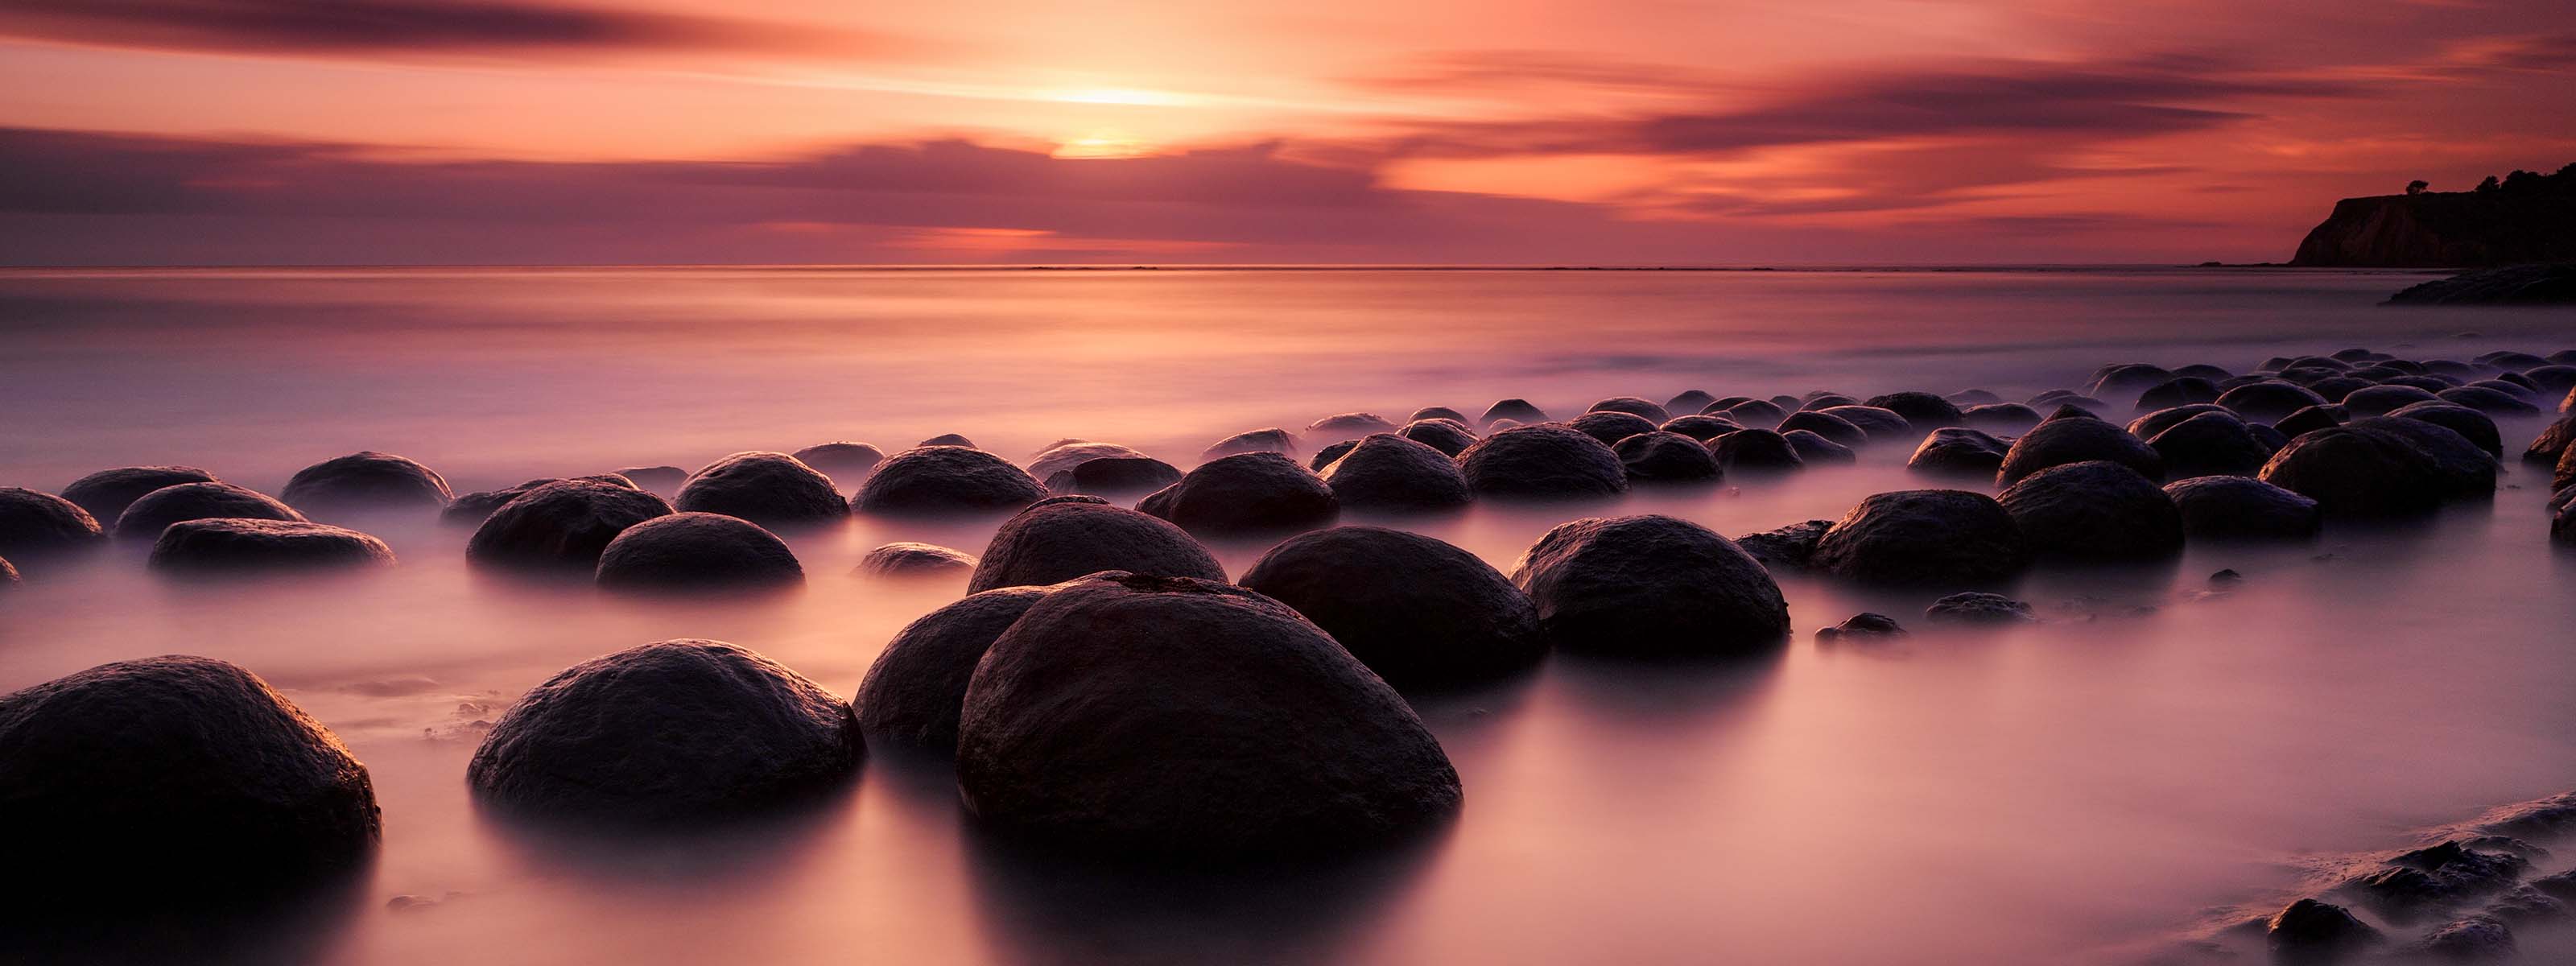 A vibrant sunset over rocks on a beach in Northern California. 